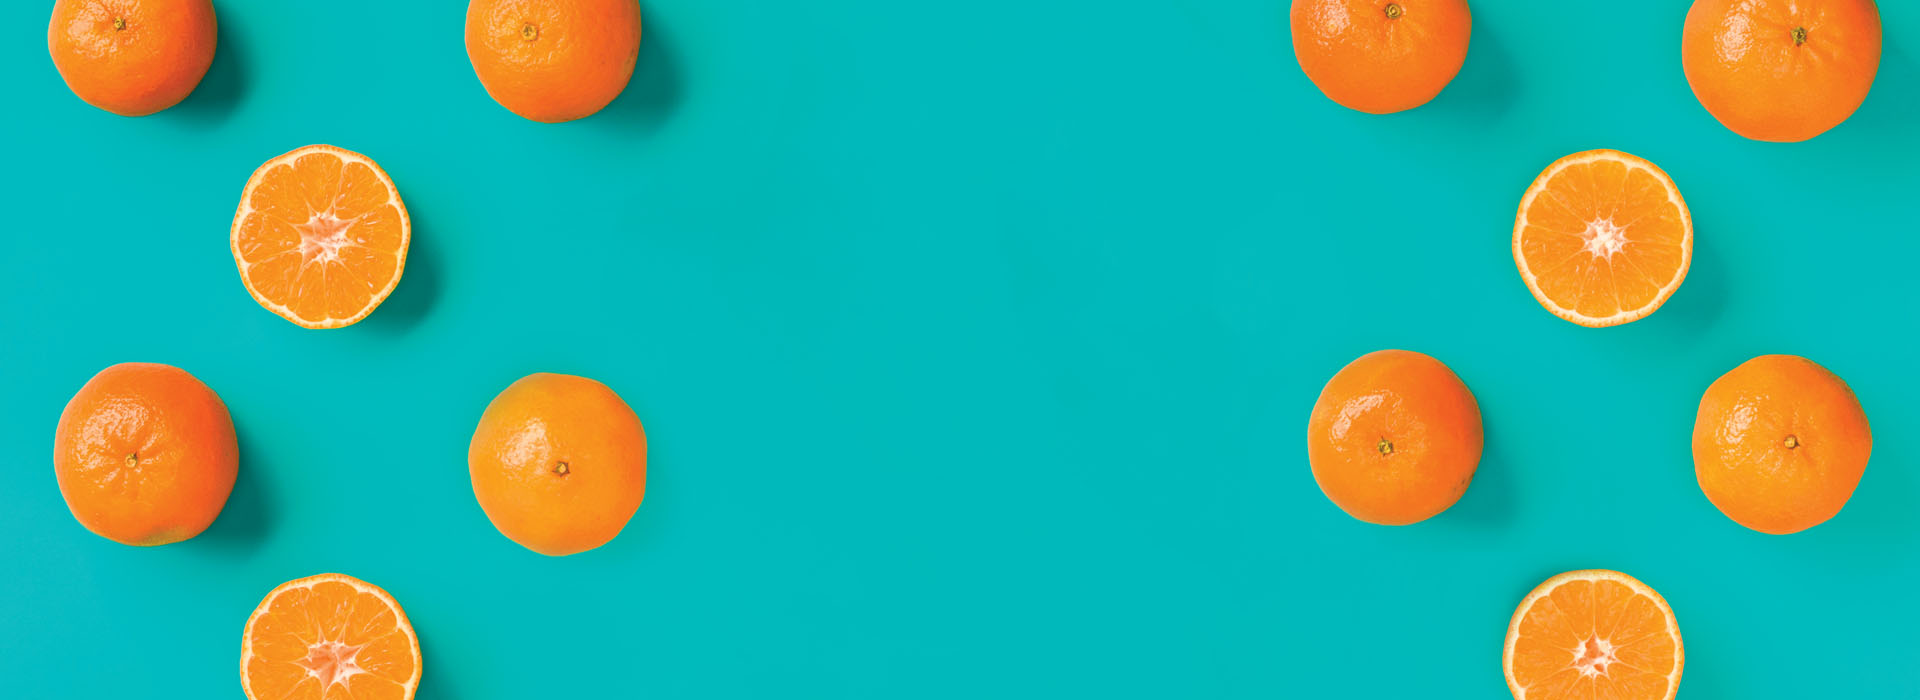 A pattern of oranges on a teal background.